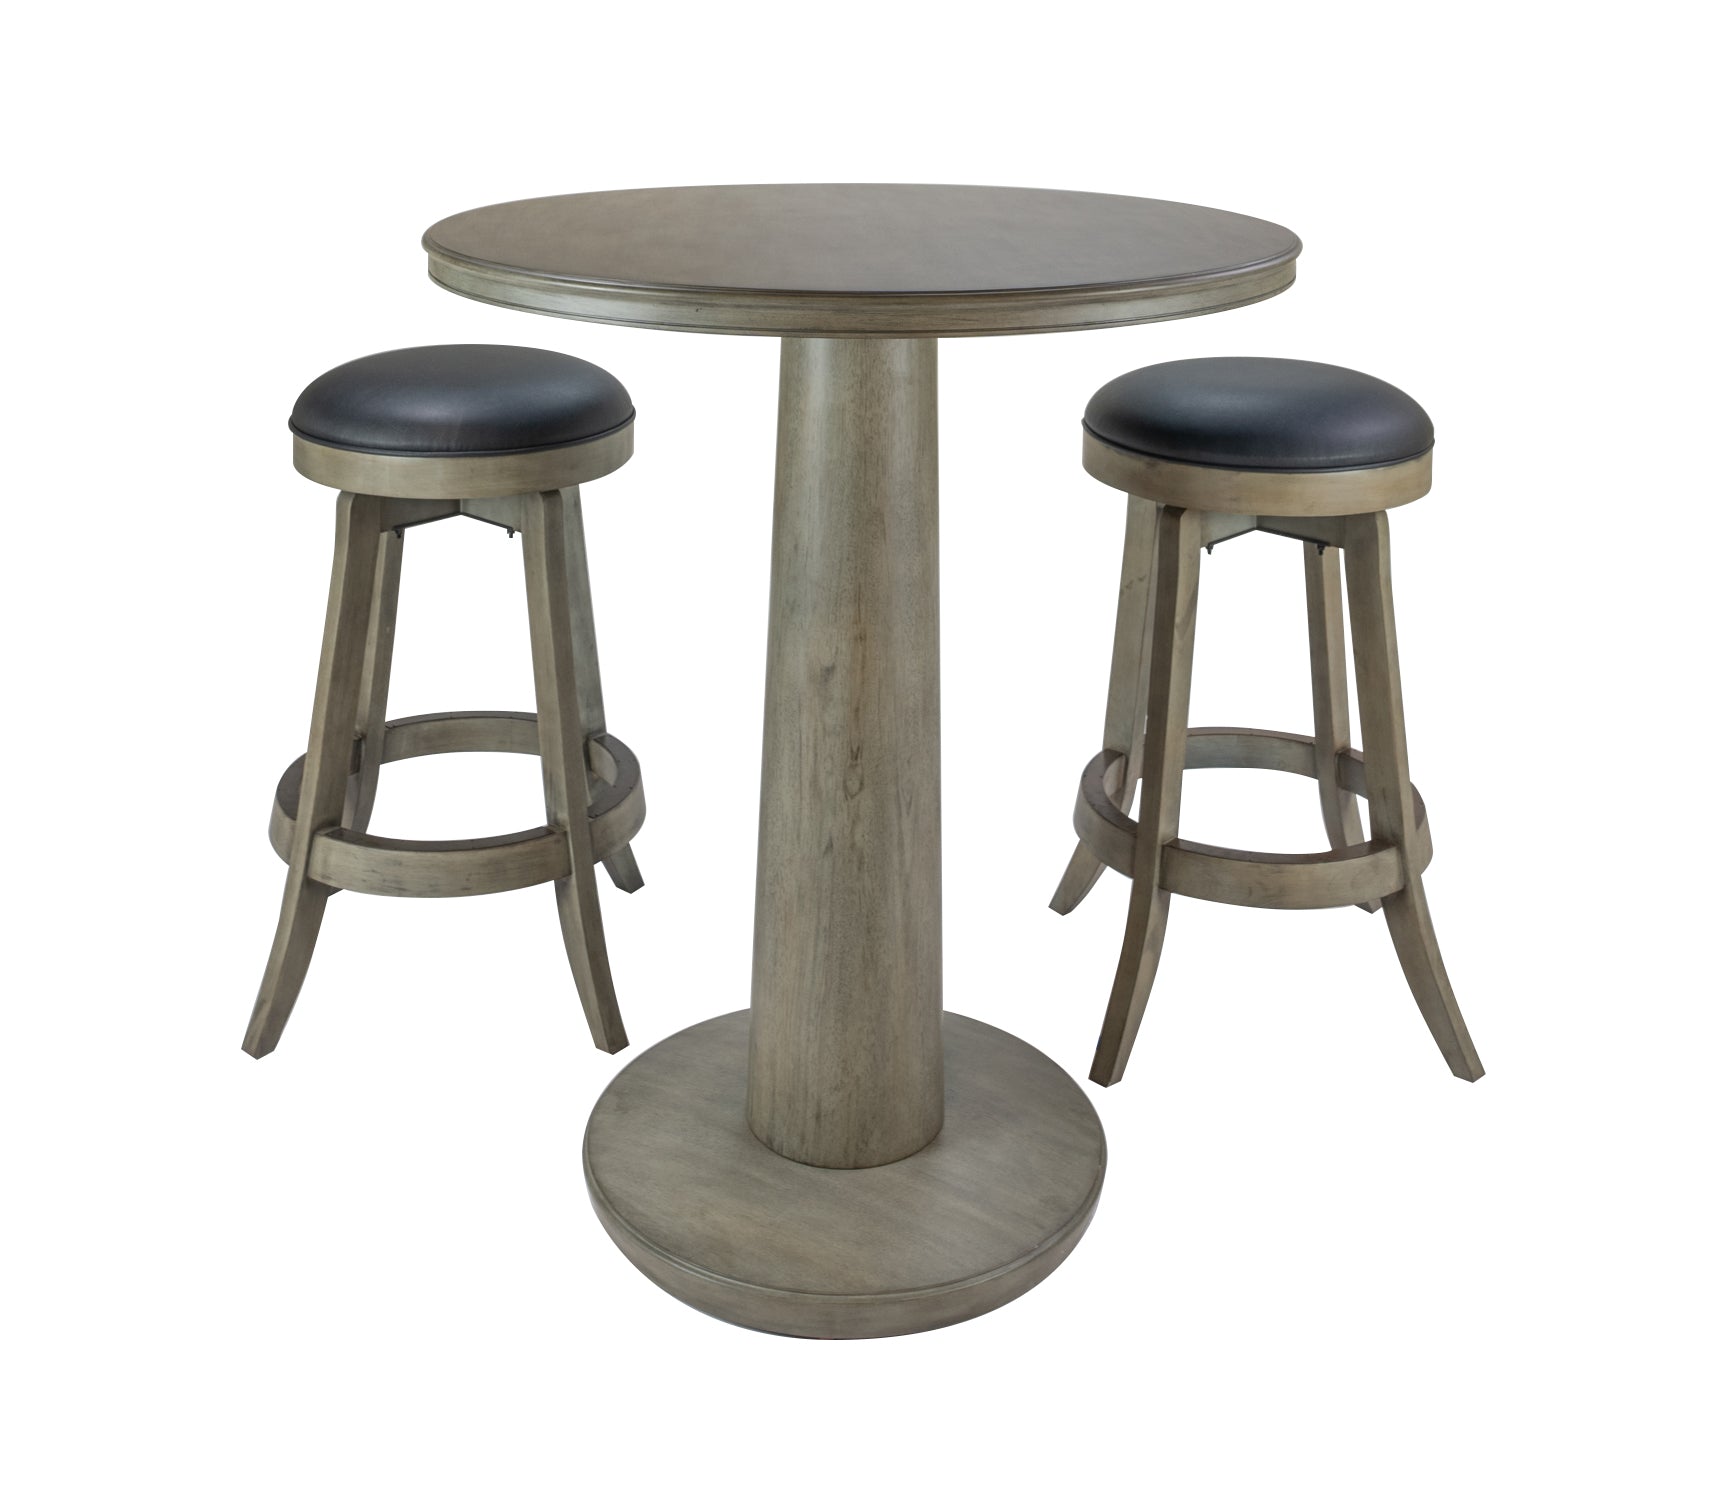 Legacy Billiards Collins Pub Table in Overcast Finish with Classic Backless Barstools